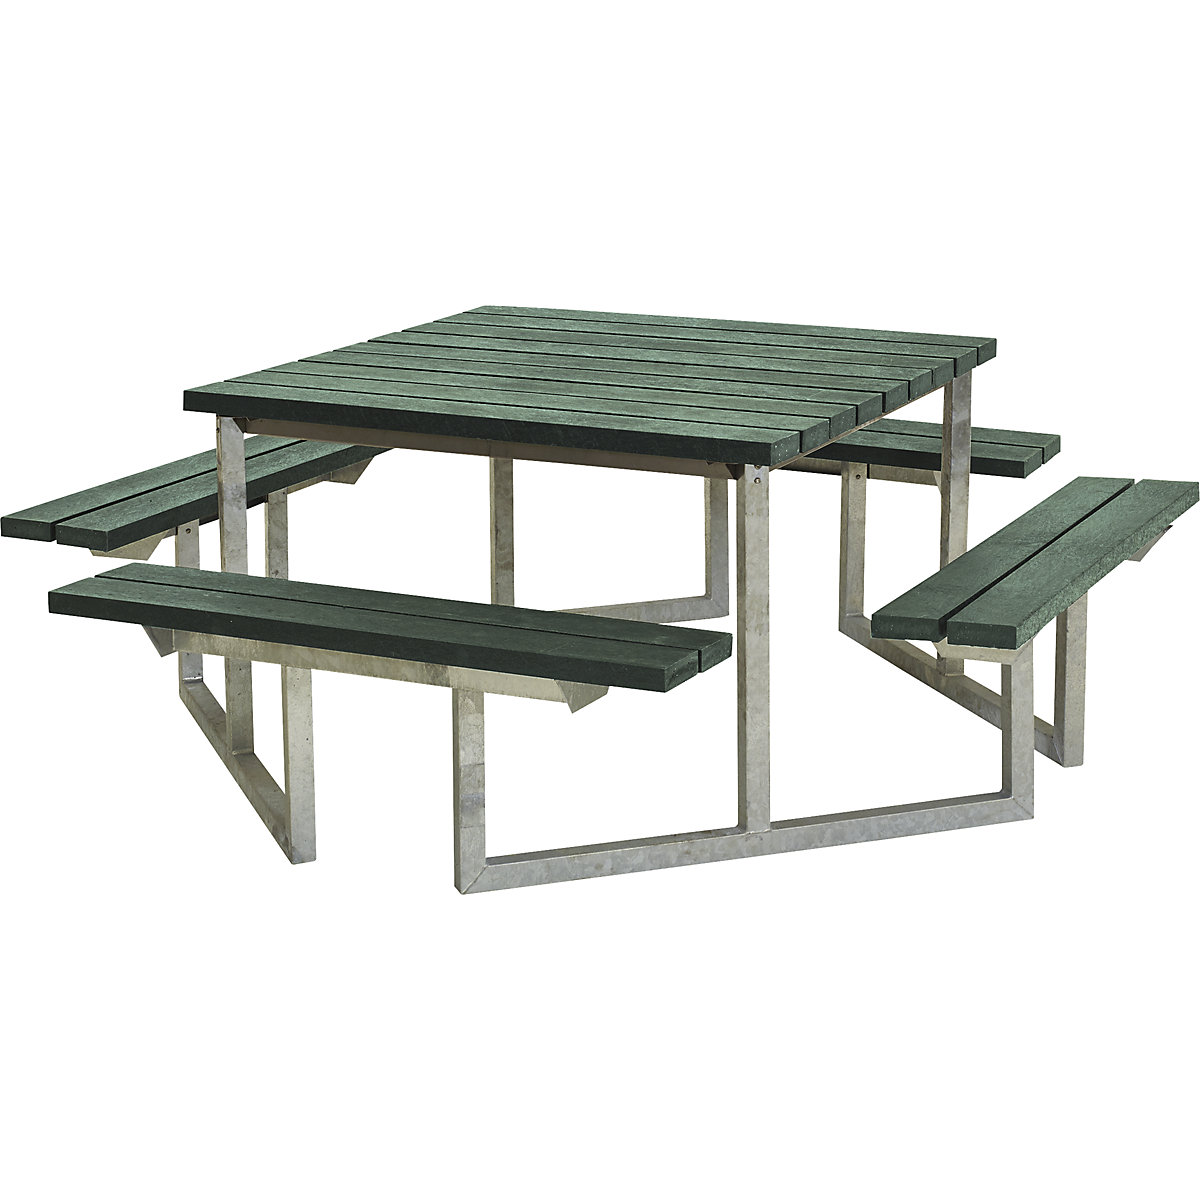 Picnic bench for 8 people